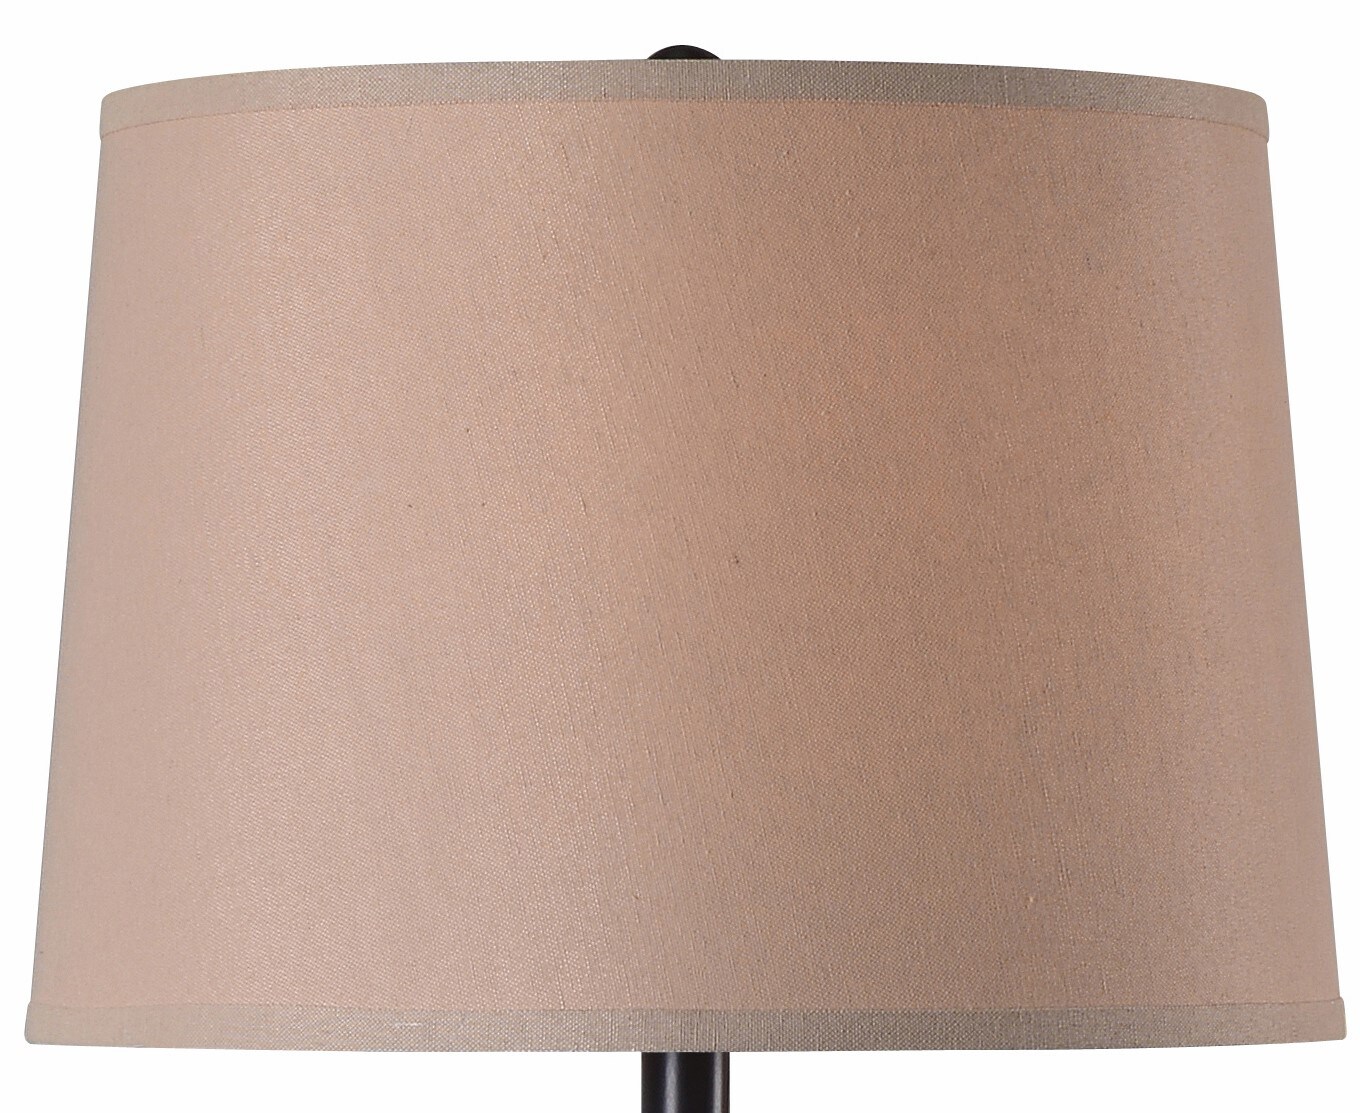 North Star Designs Krieger 61-in Warm Bronze Shaded Floor Lamp at Lowes.com